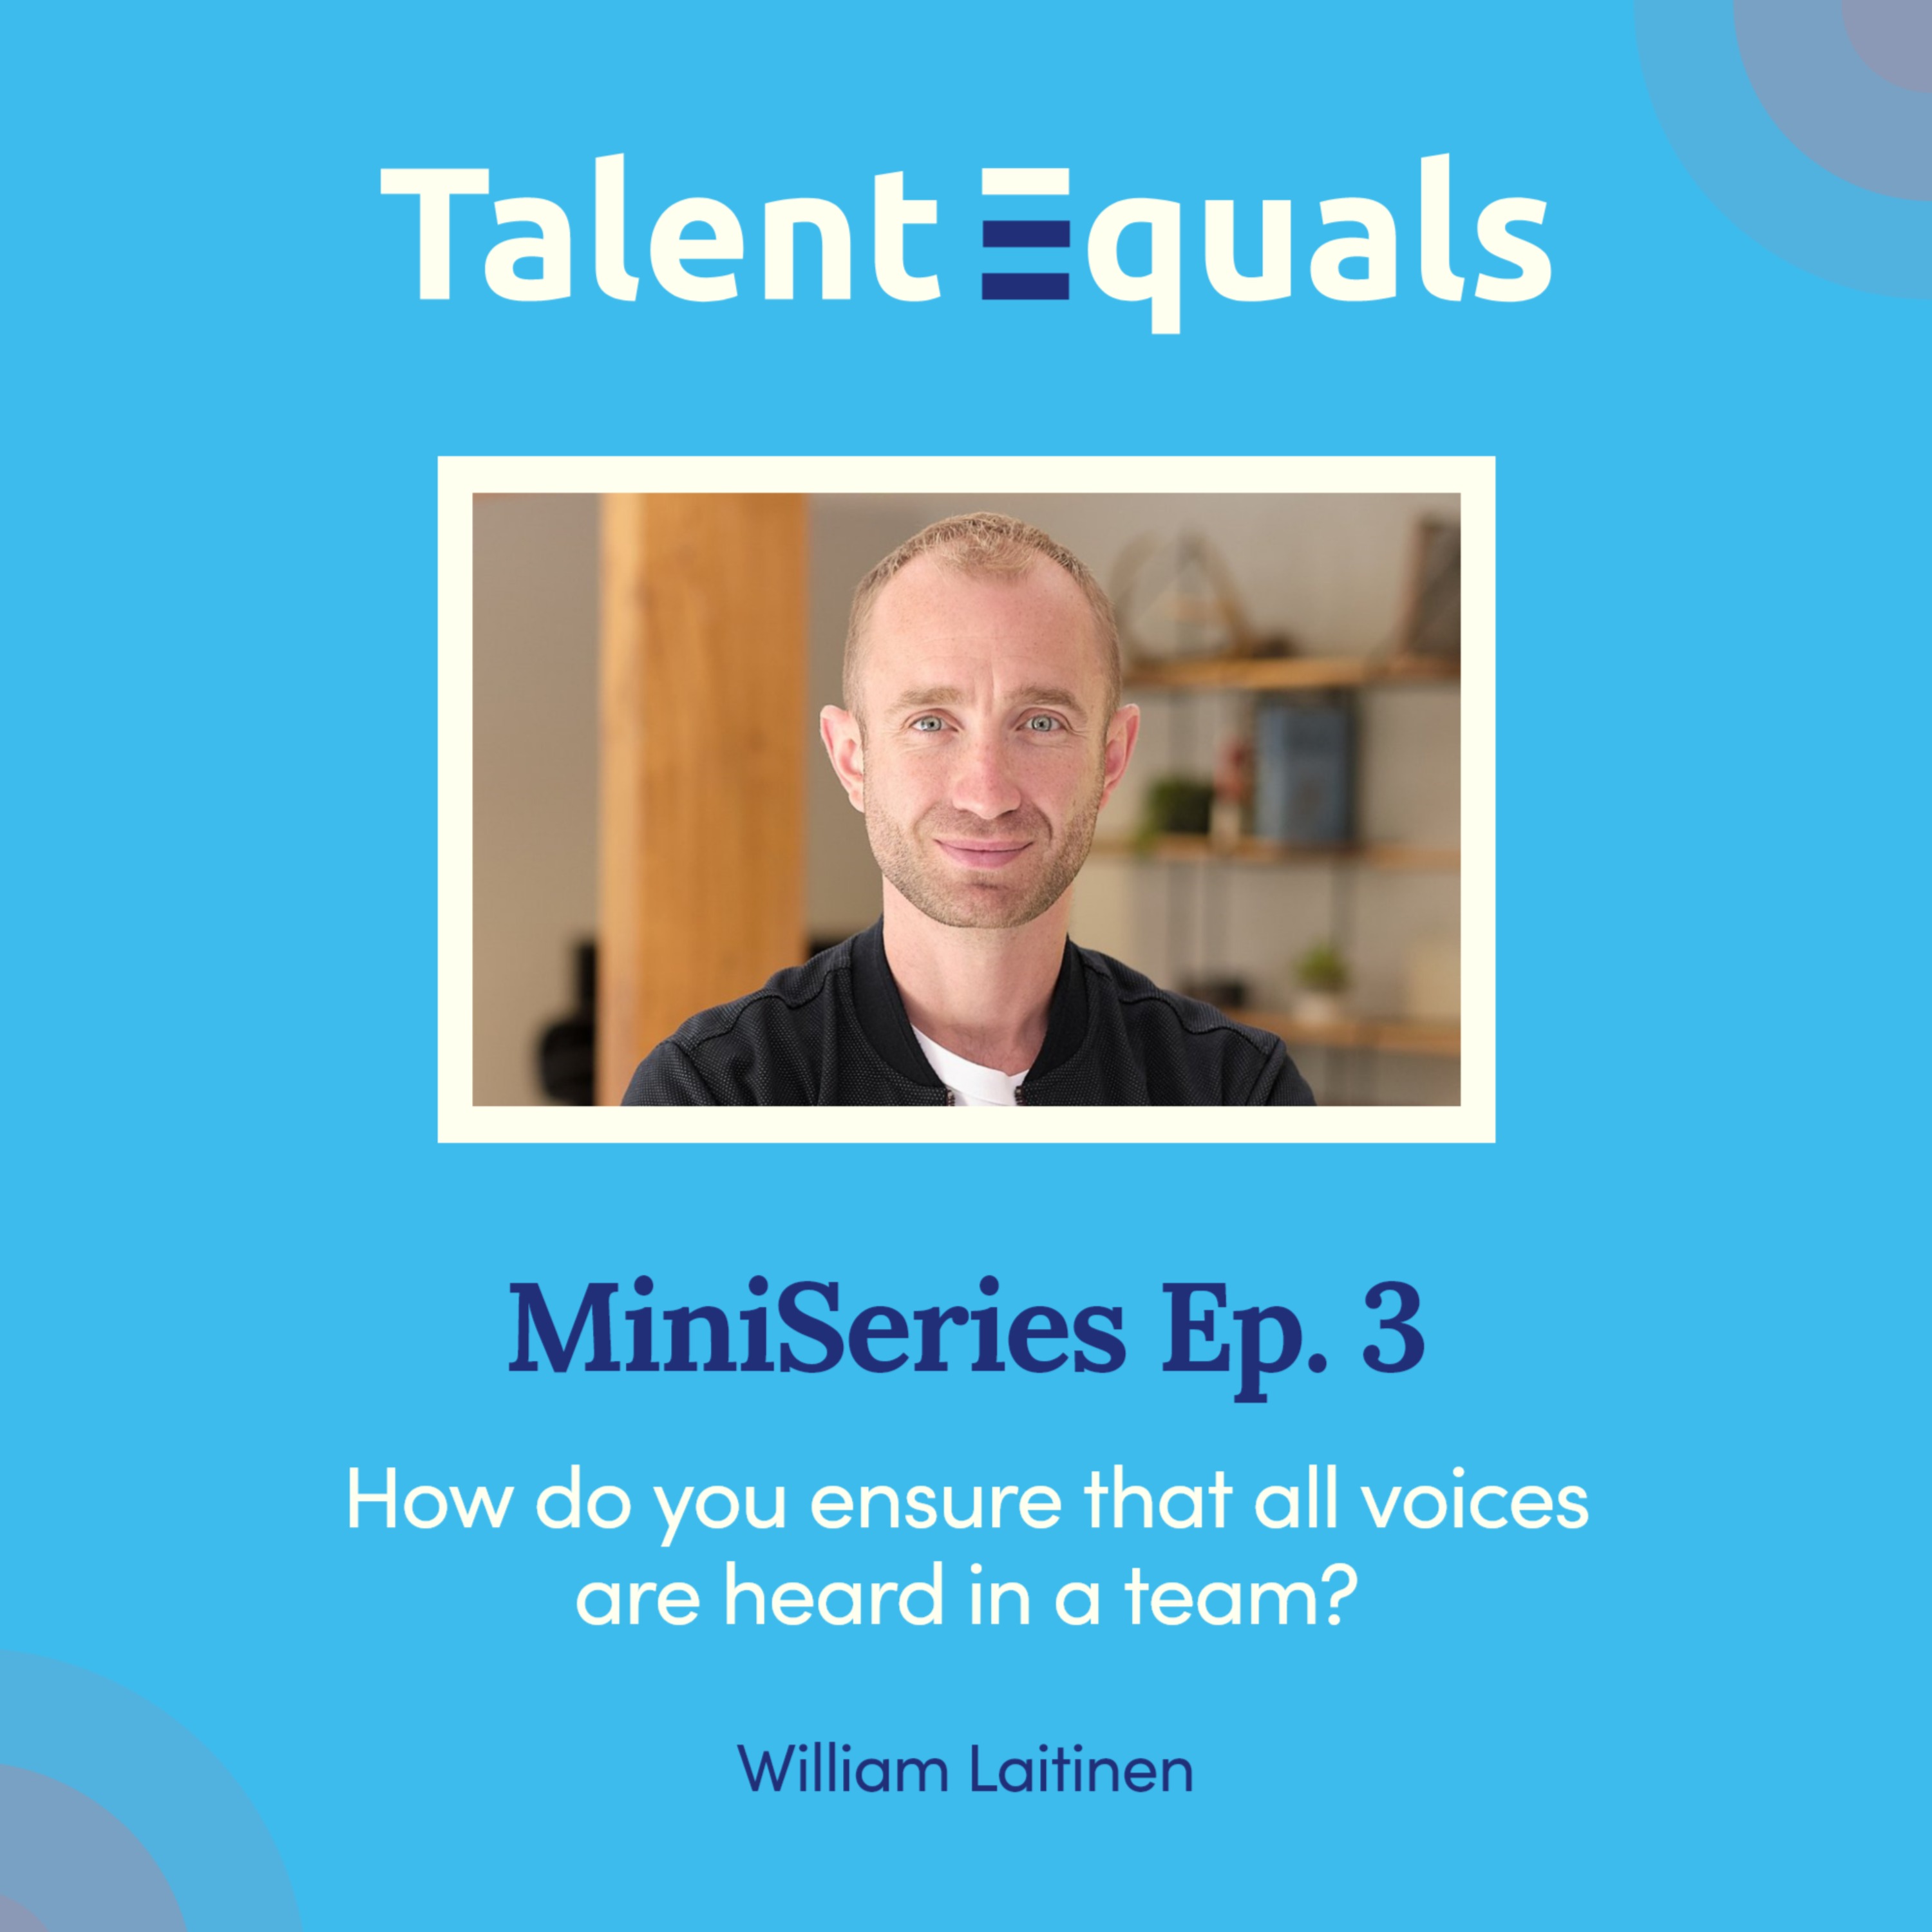 How do you ensure that all voices are heard in a team?